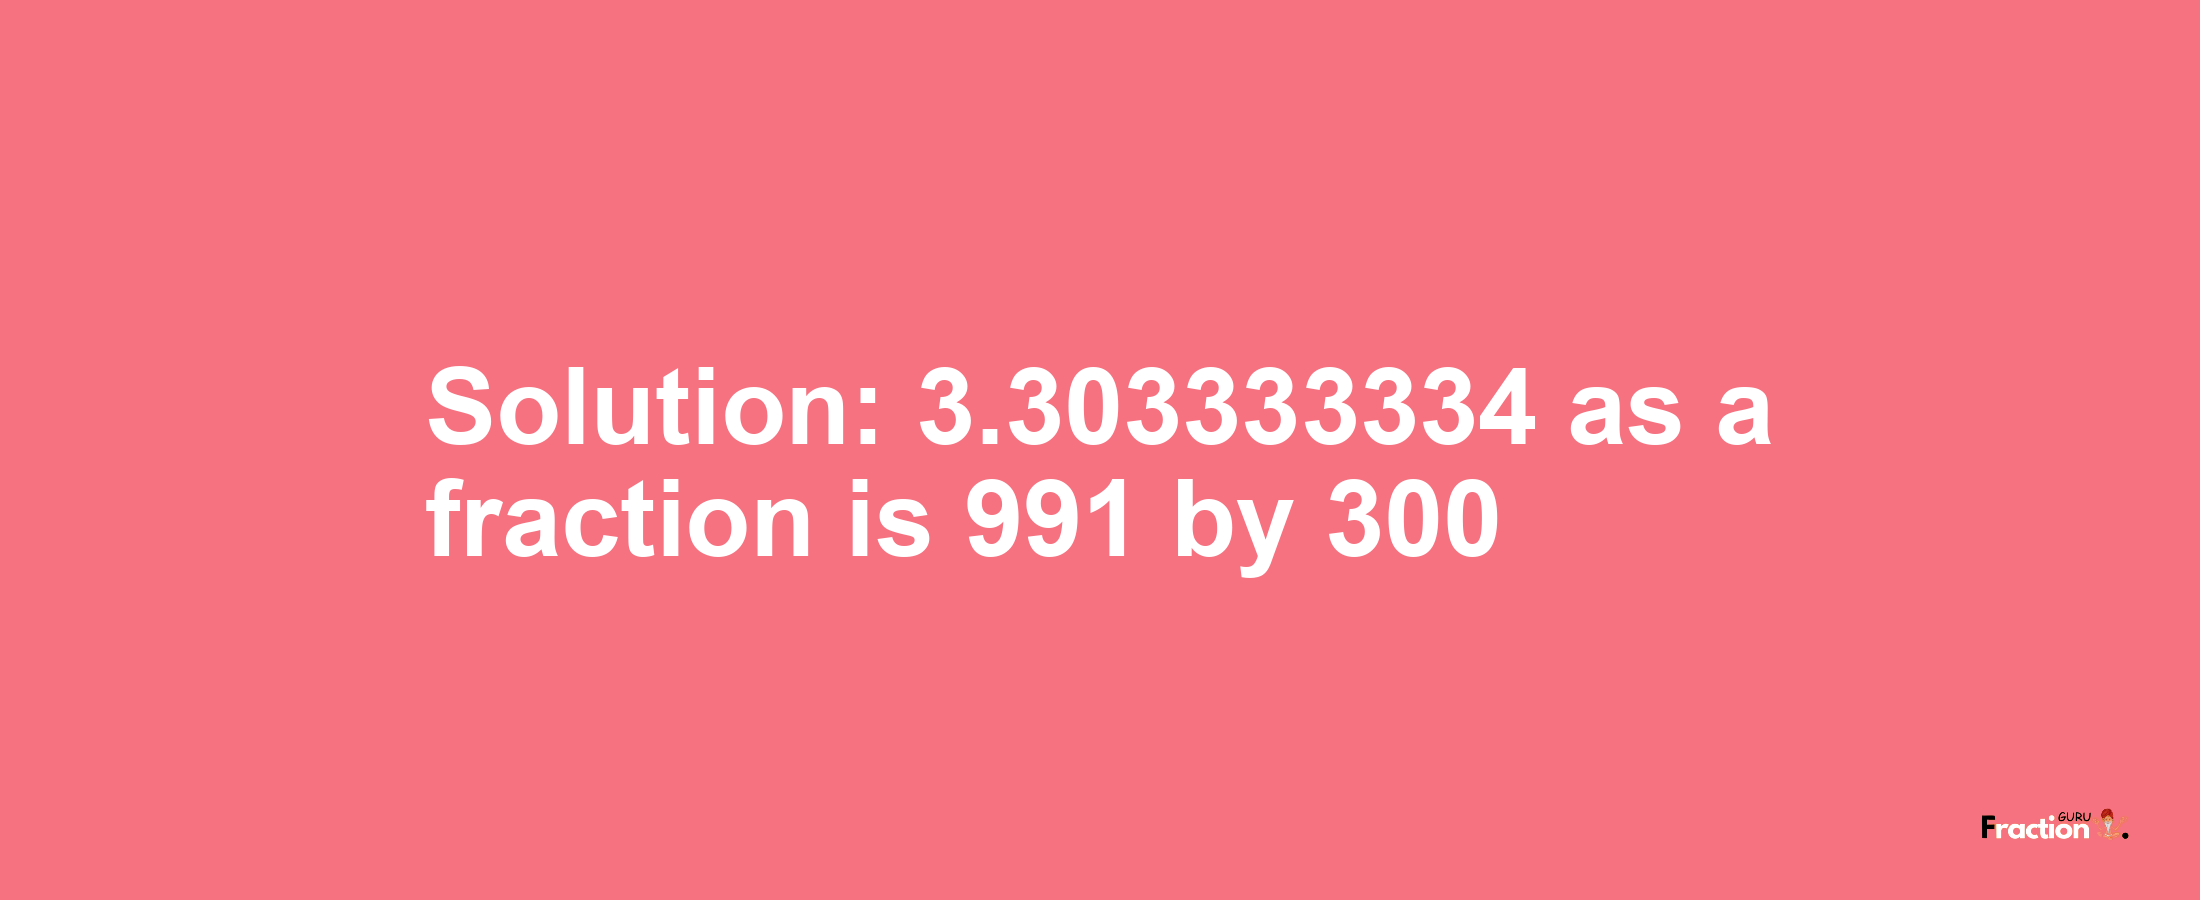 Solution:3.303333334 as a fraction is 991/300